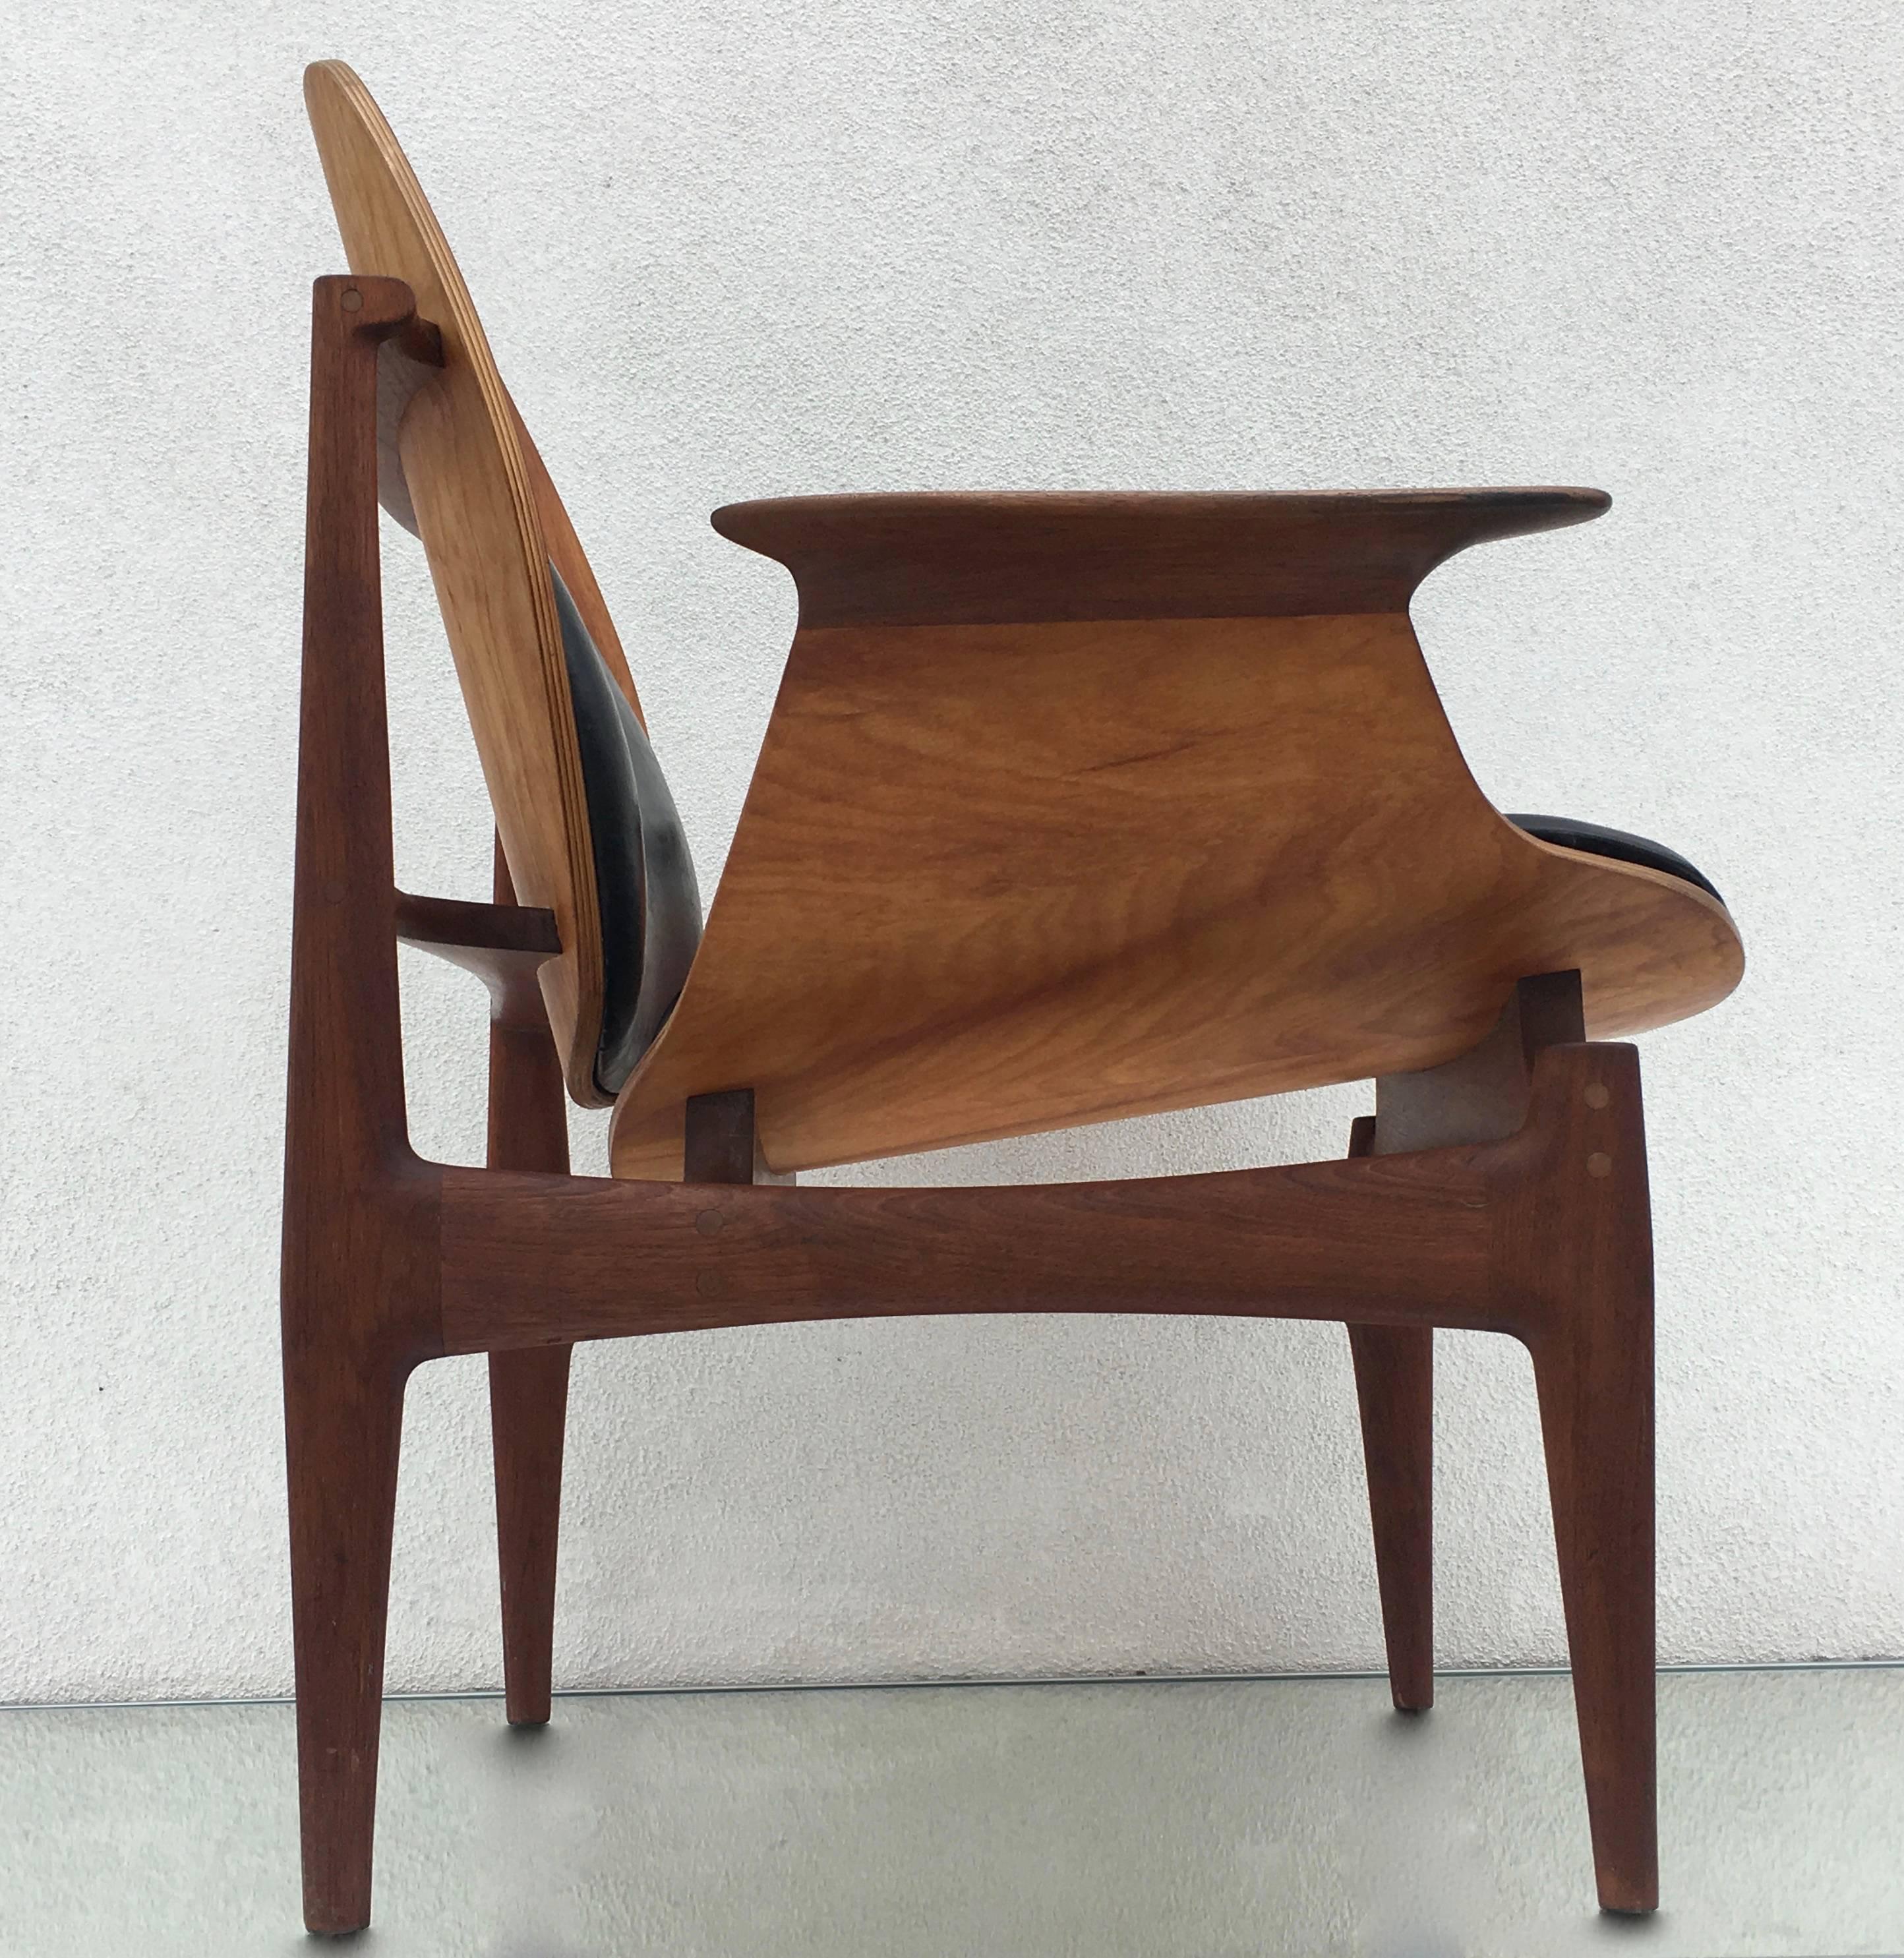 Mid-Century Modern Stunning One off 1/1 Studio Chair by John McWilliams, California, circa 1960s For Sale